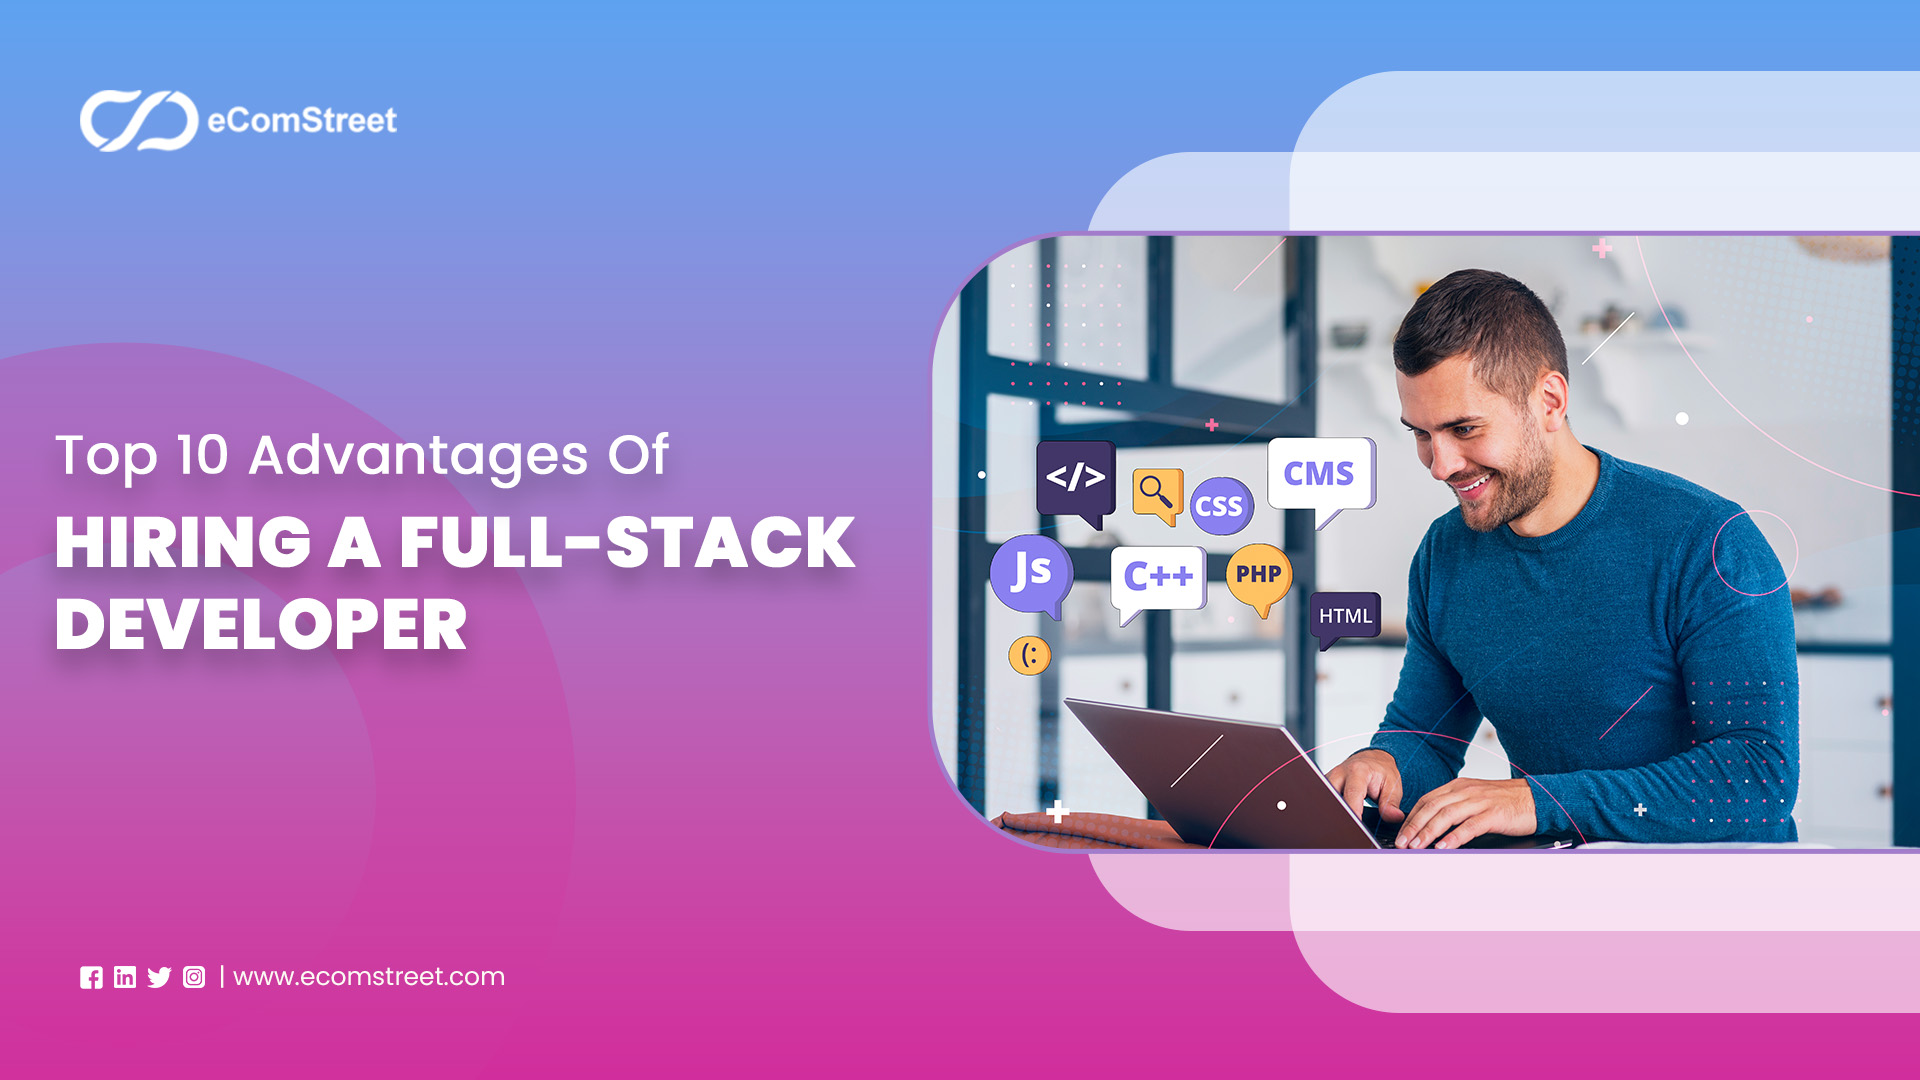 Top 10 Advantage of Hiring Full Stack Developers